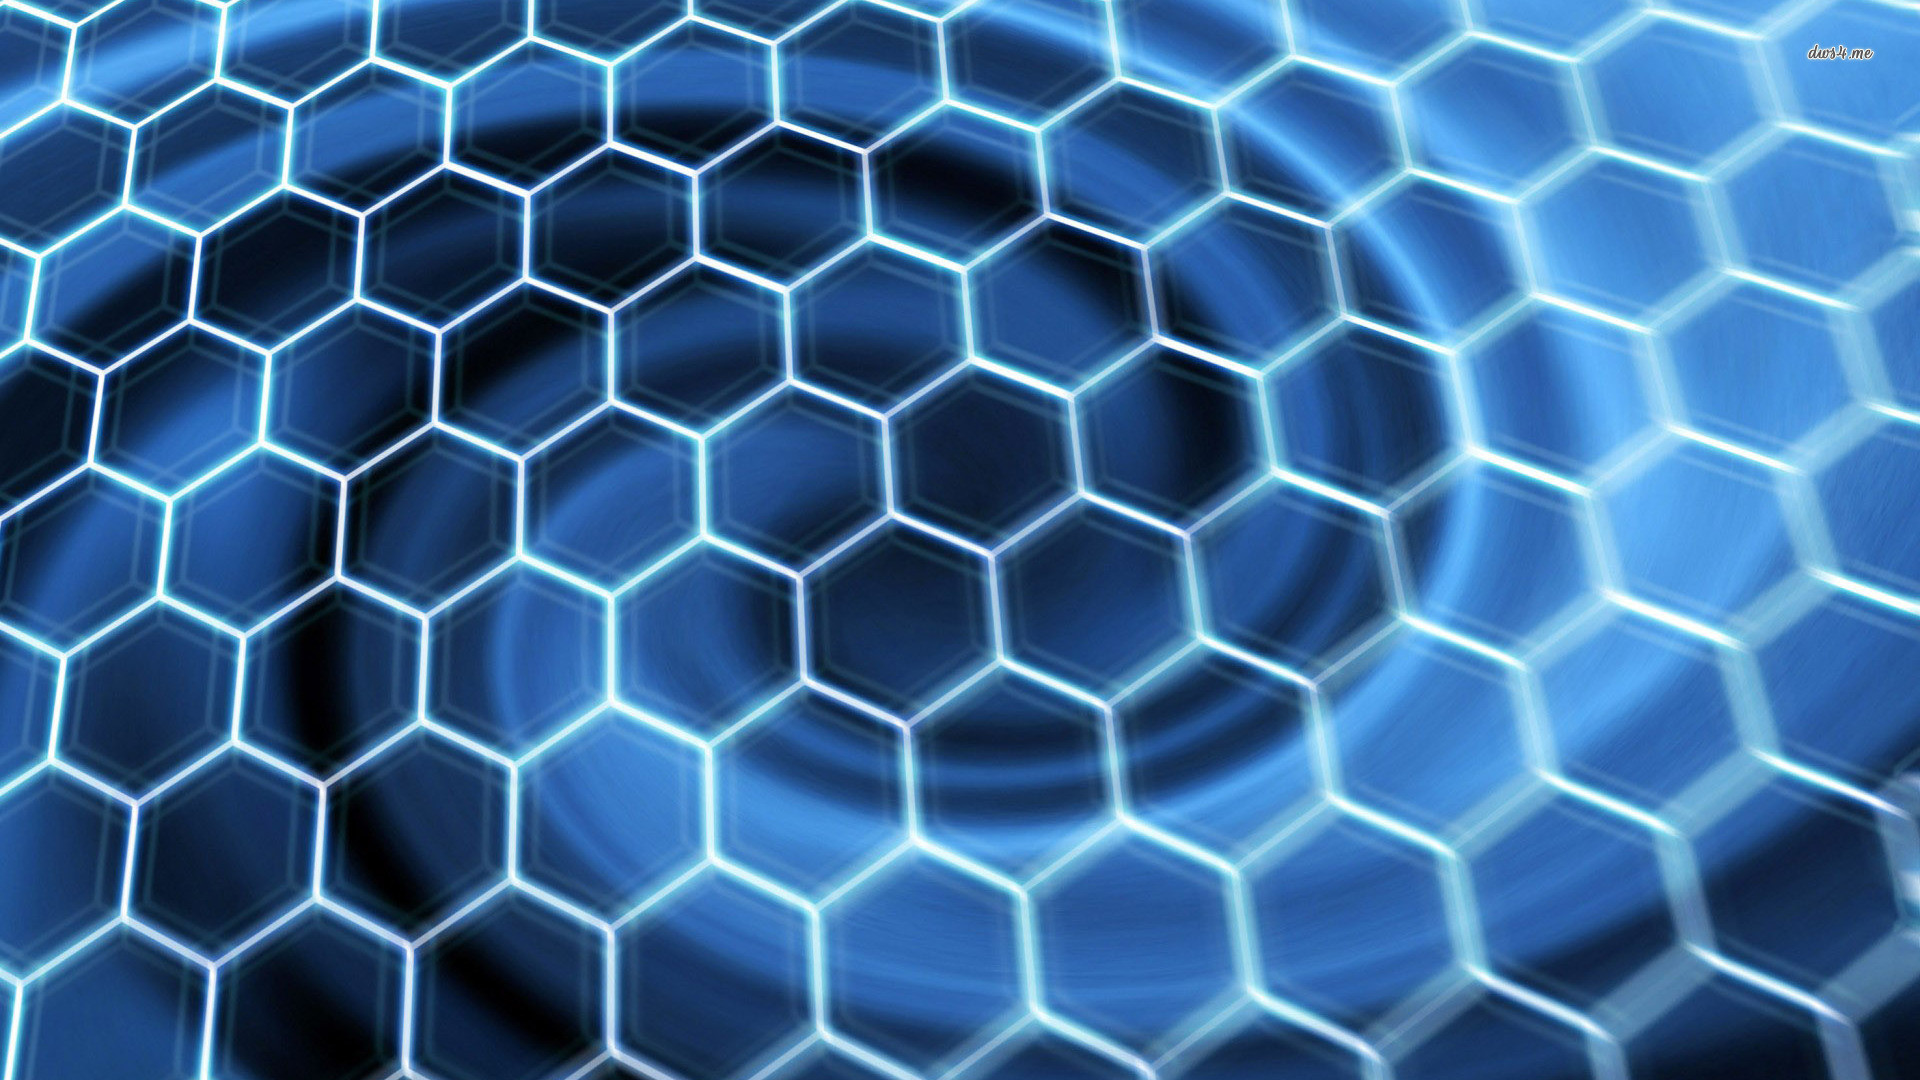 1920x1080 Honeycomb pattern wallpaper - Abstract wallpapers - #12652